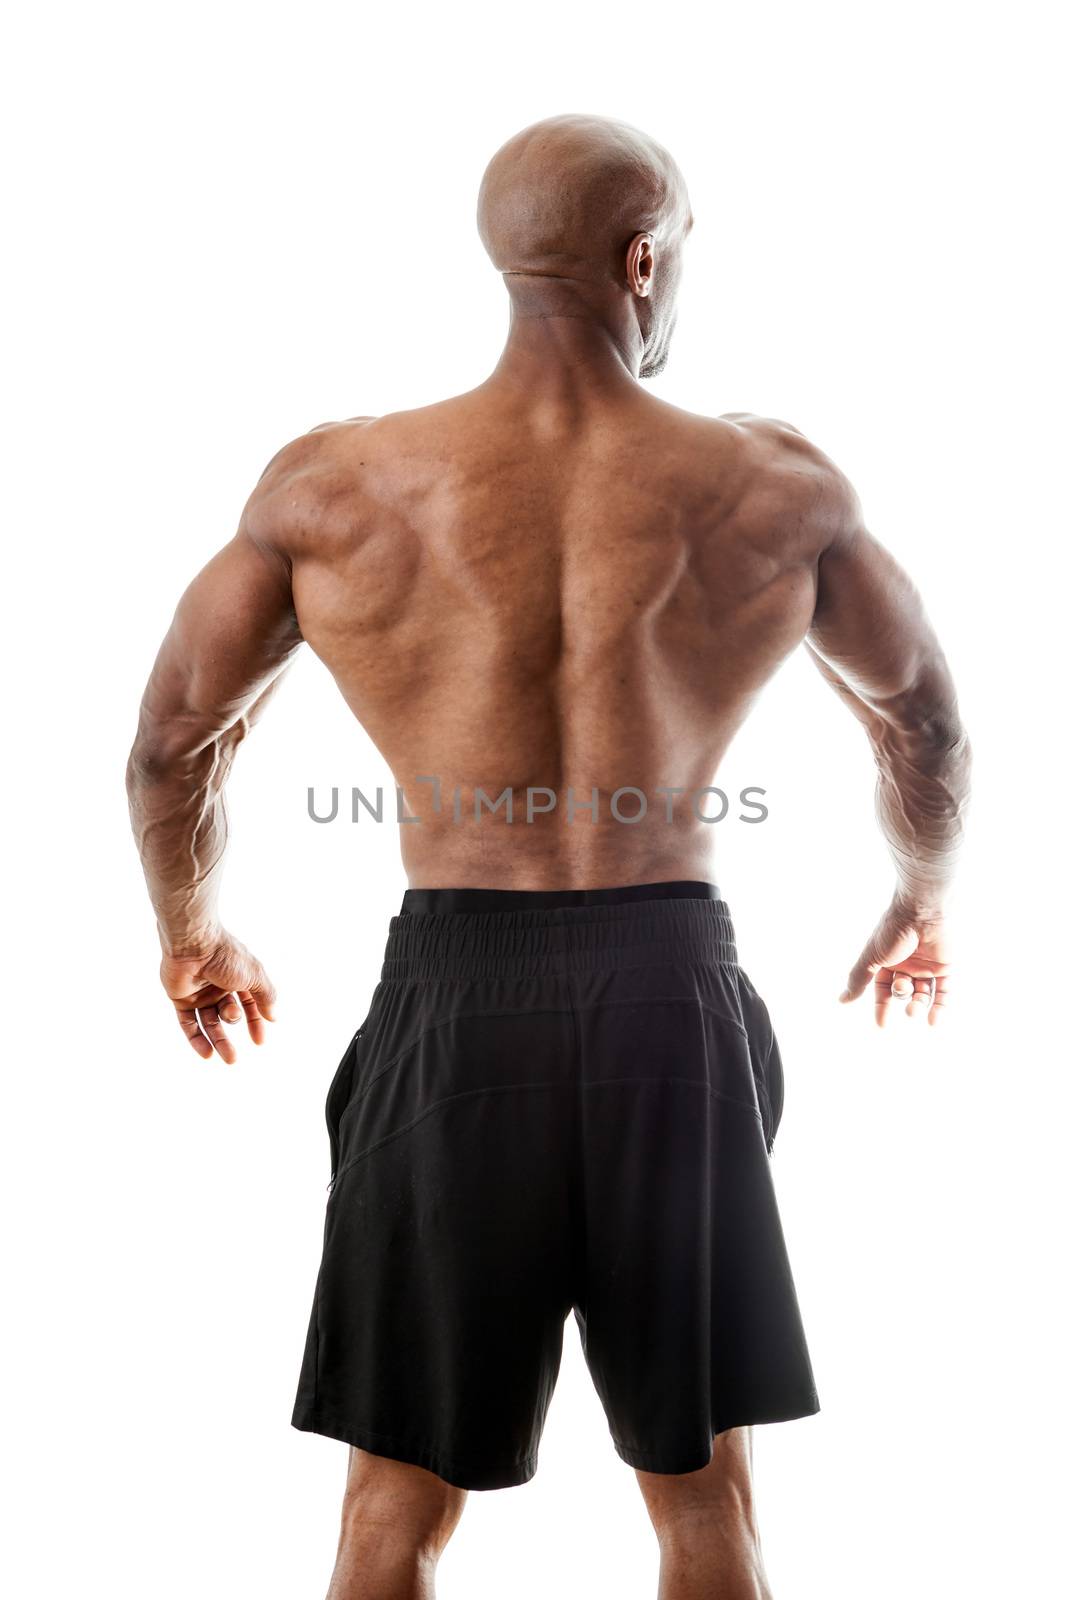 Strong Muscular Back by graficallyminded